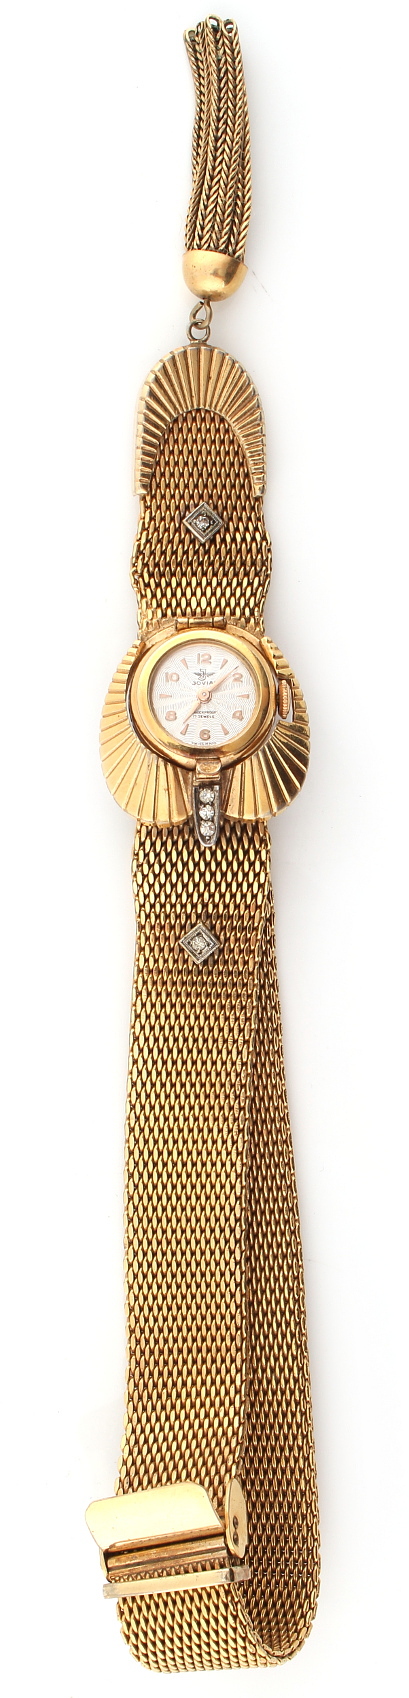 Property of a lady - a Jovial gold plated bracelet dress watch, with Swiss 17-jewel movement.